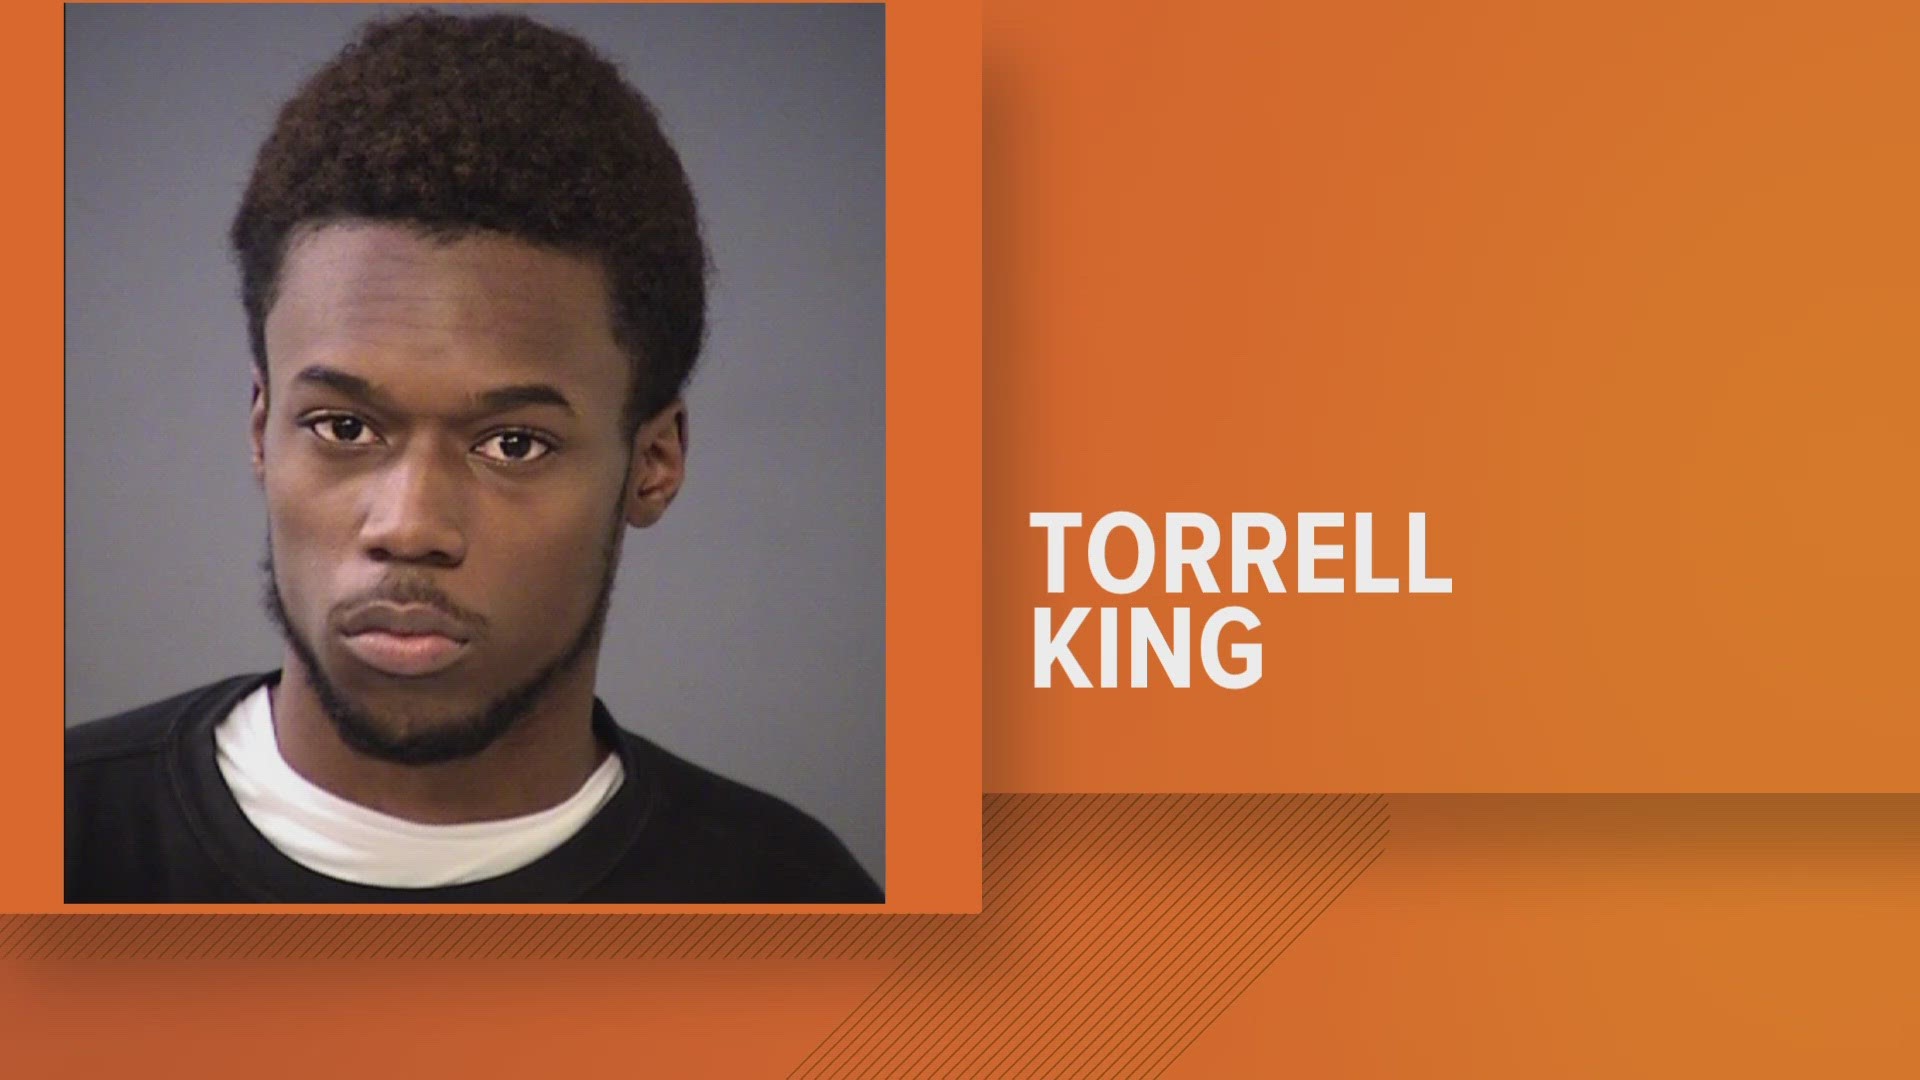 Torrell King is one of two suspects charged in a September 2021 crash at Washington Street and Ritter Avenue that killed 7-year-old Hannah Crutchfield.